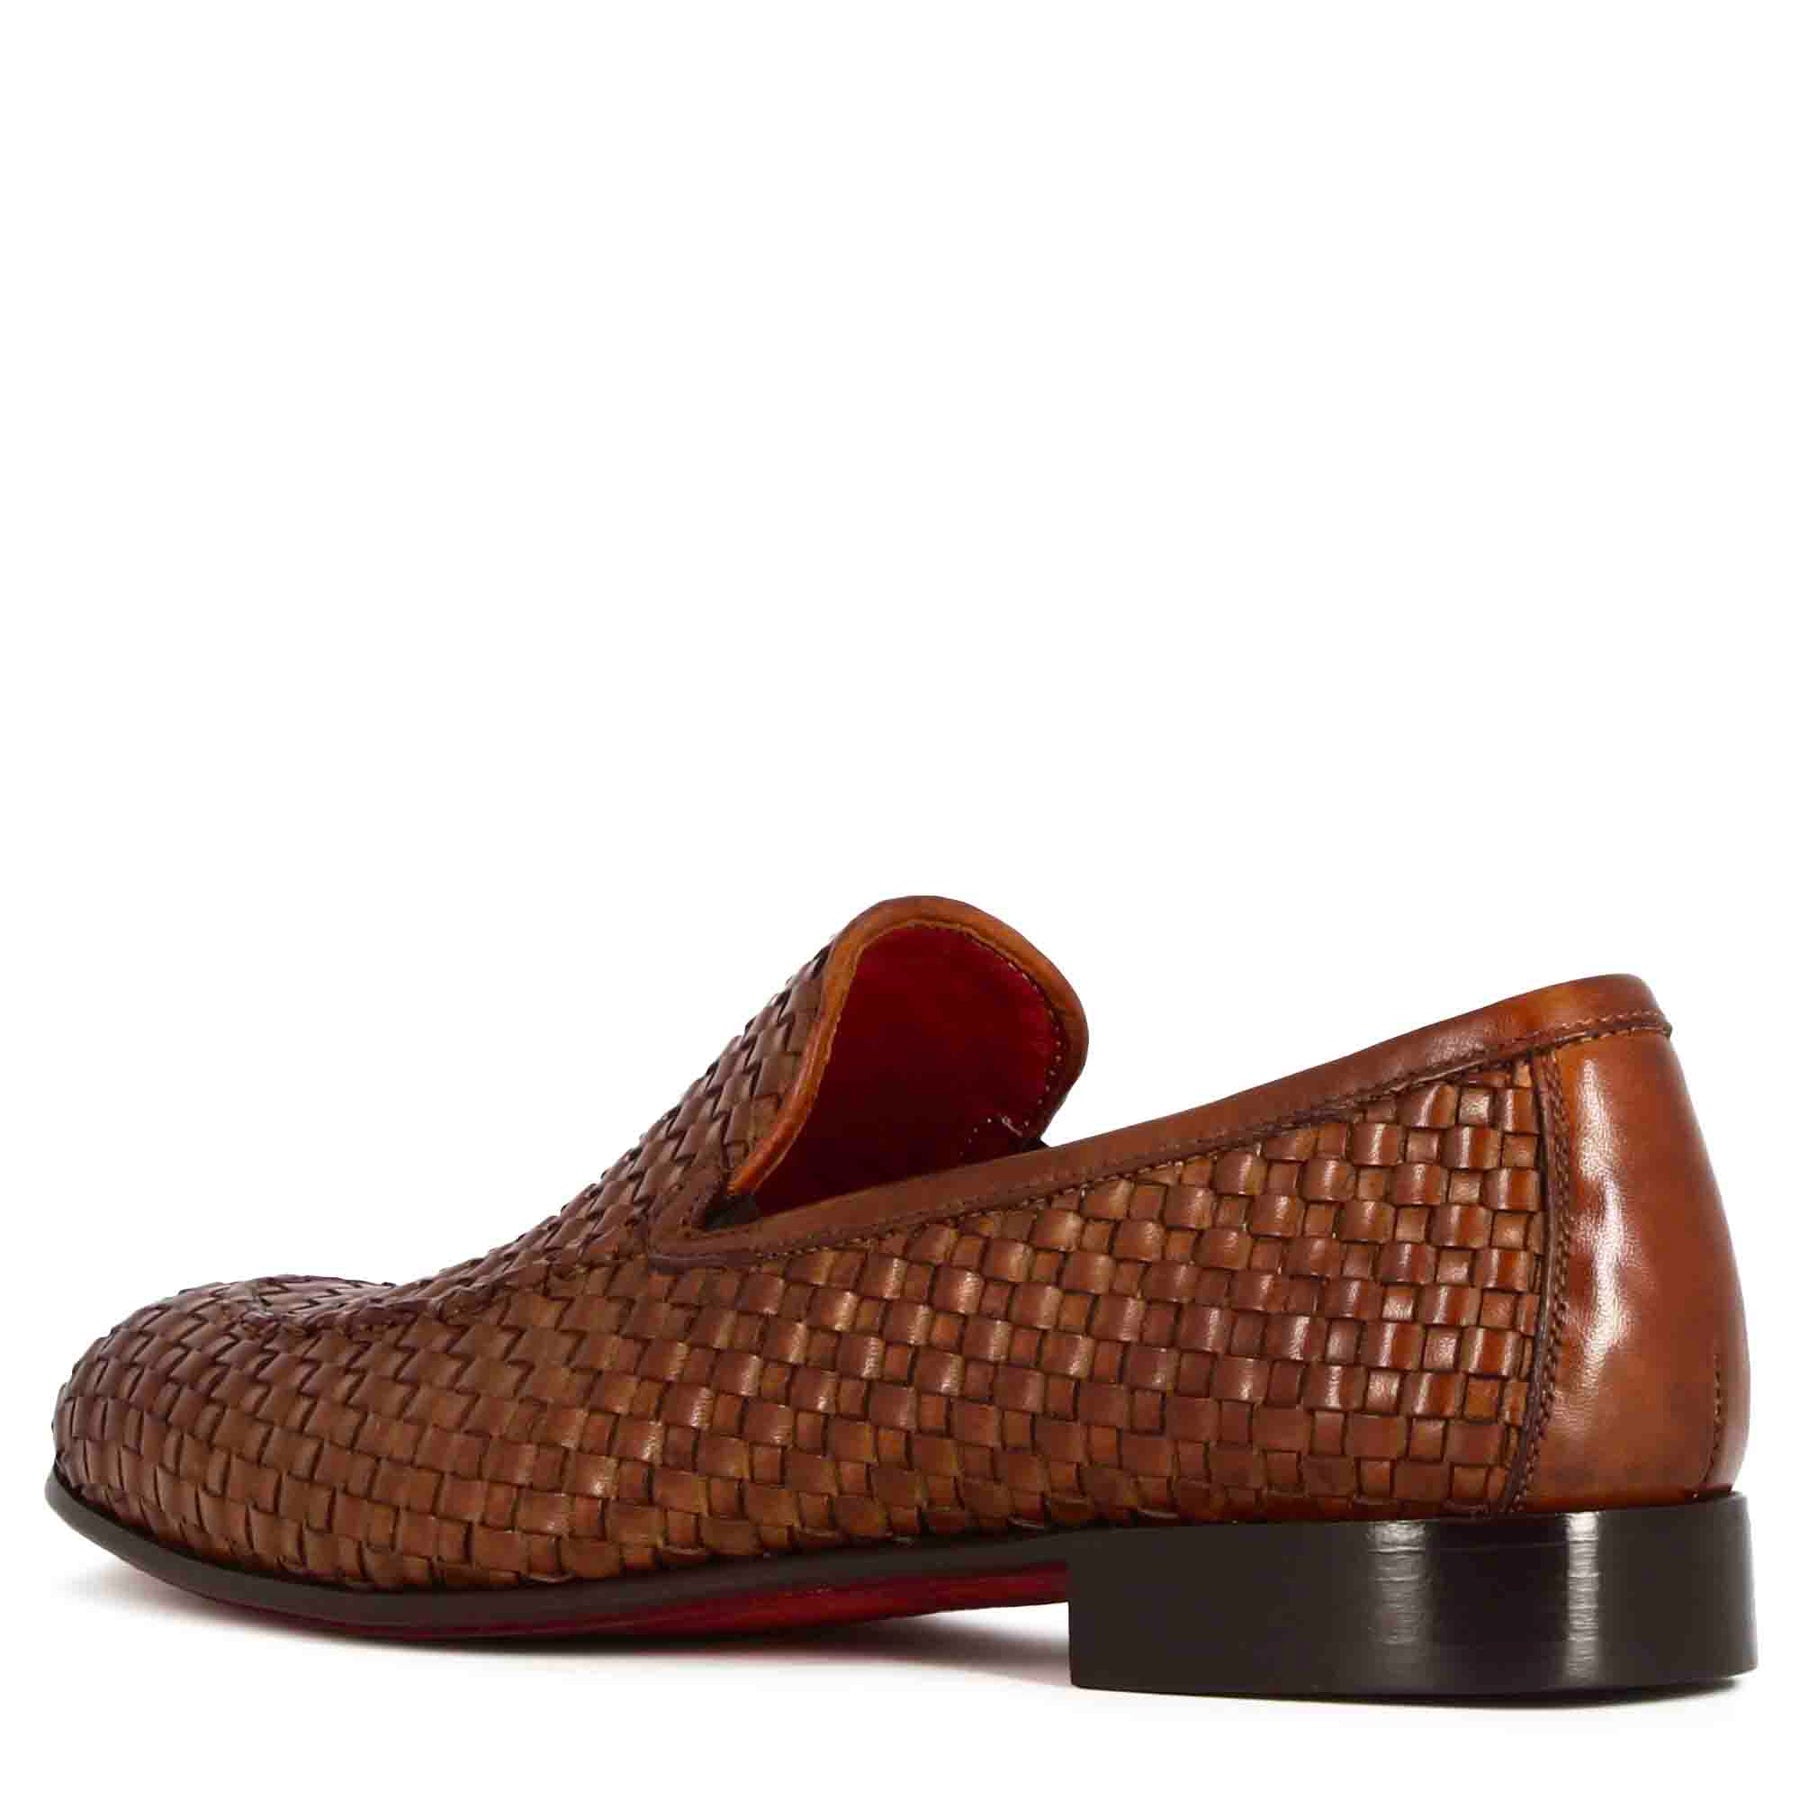 Classic men's loafer in light brown woven leather